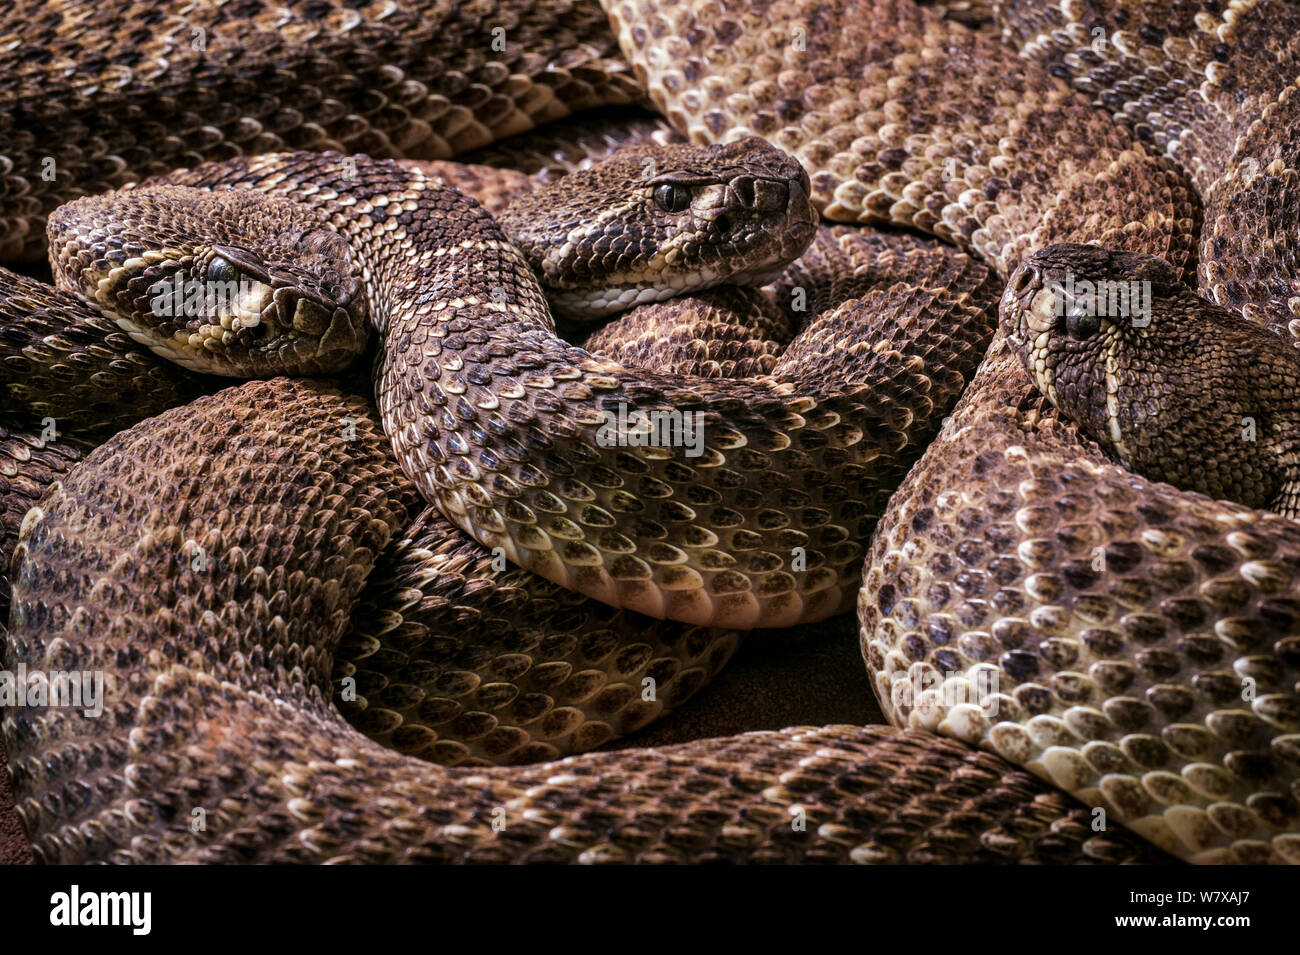 Three Western diamondback rattlesnakes (Crotalus atrox) coiled up, captive. Occurs in the United States and Mexico. Stock Photo